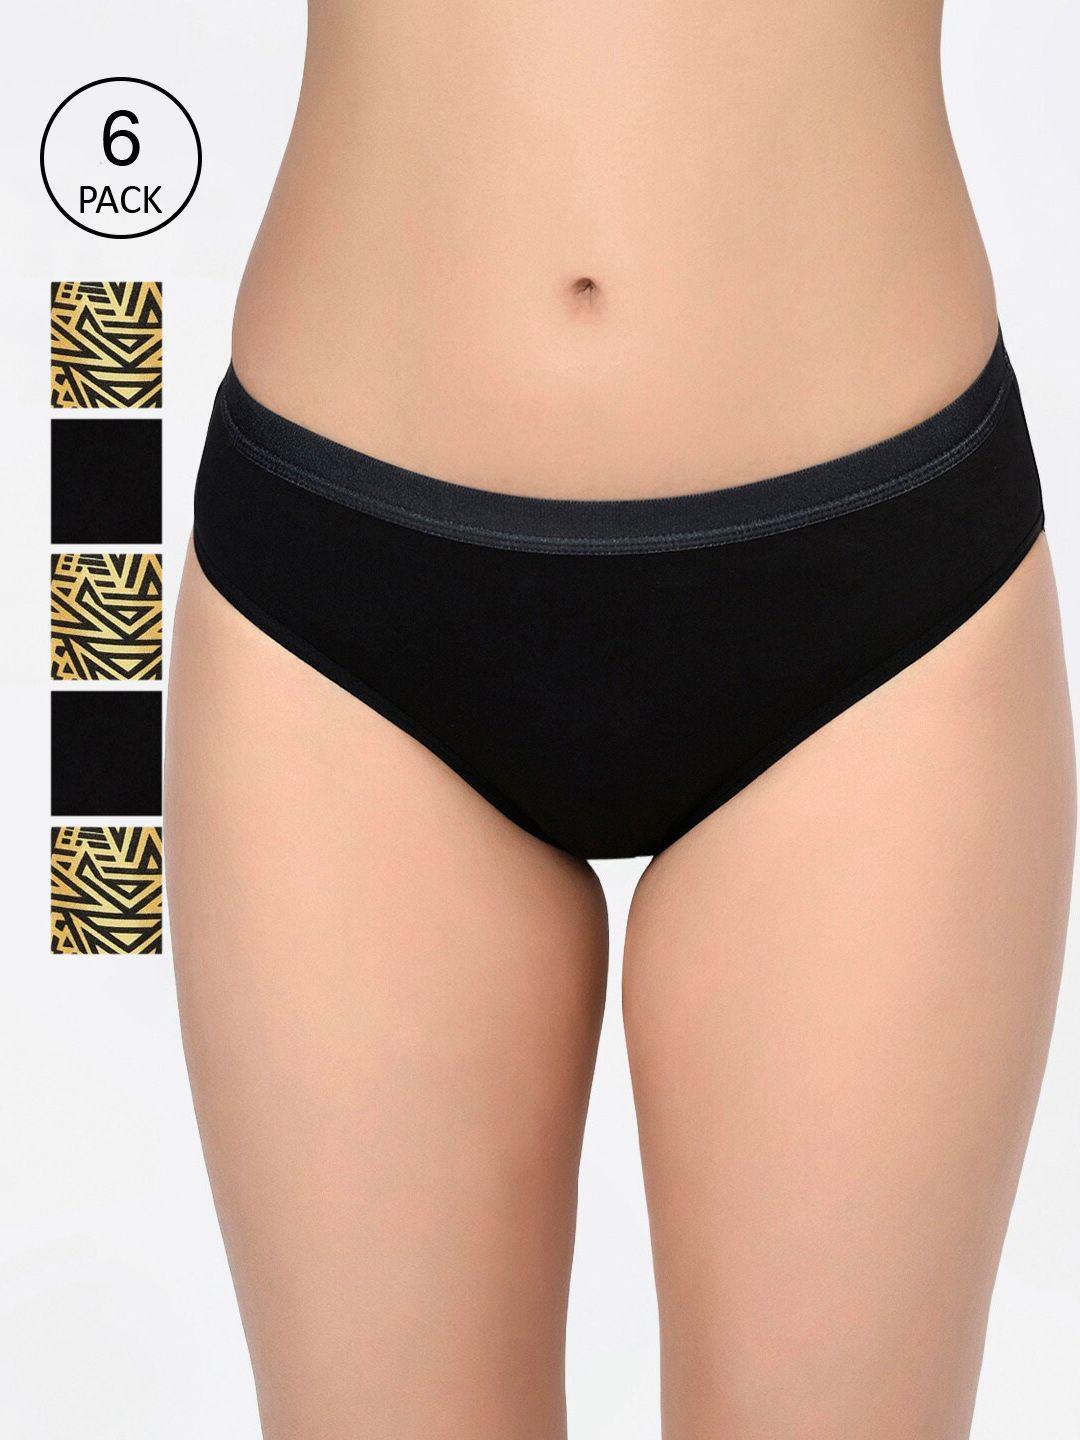 bodycare women pack of 6 assorted hipster briefs 1109-6pcs